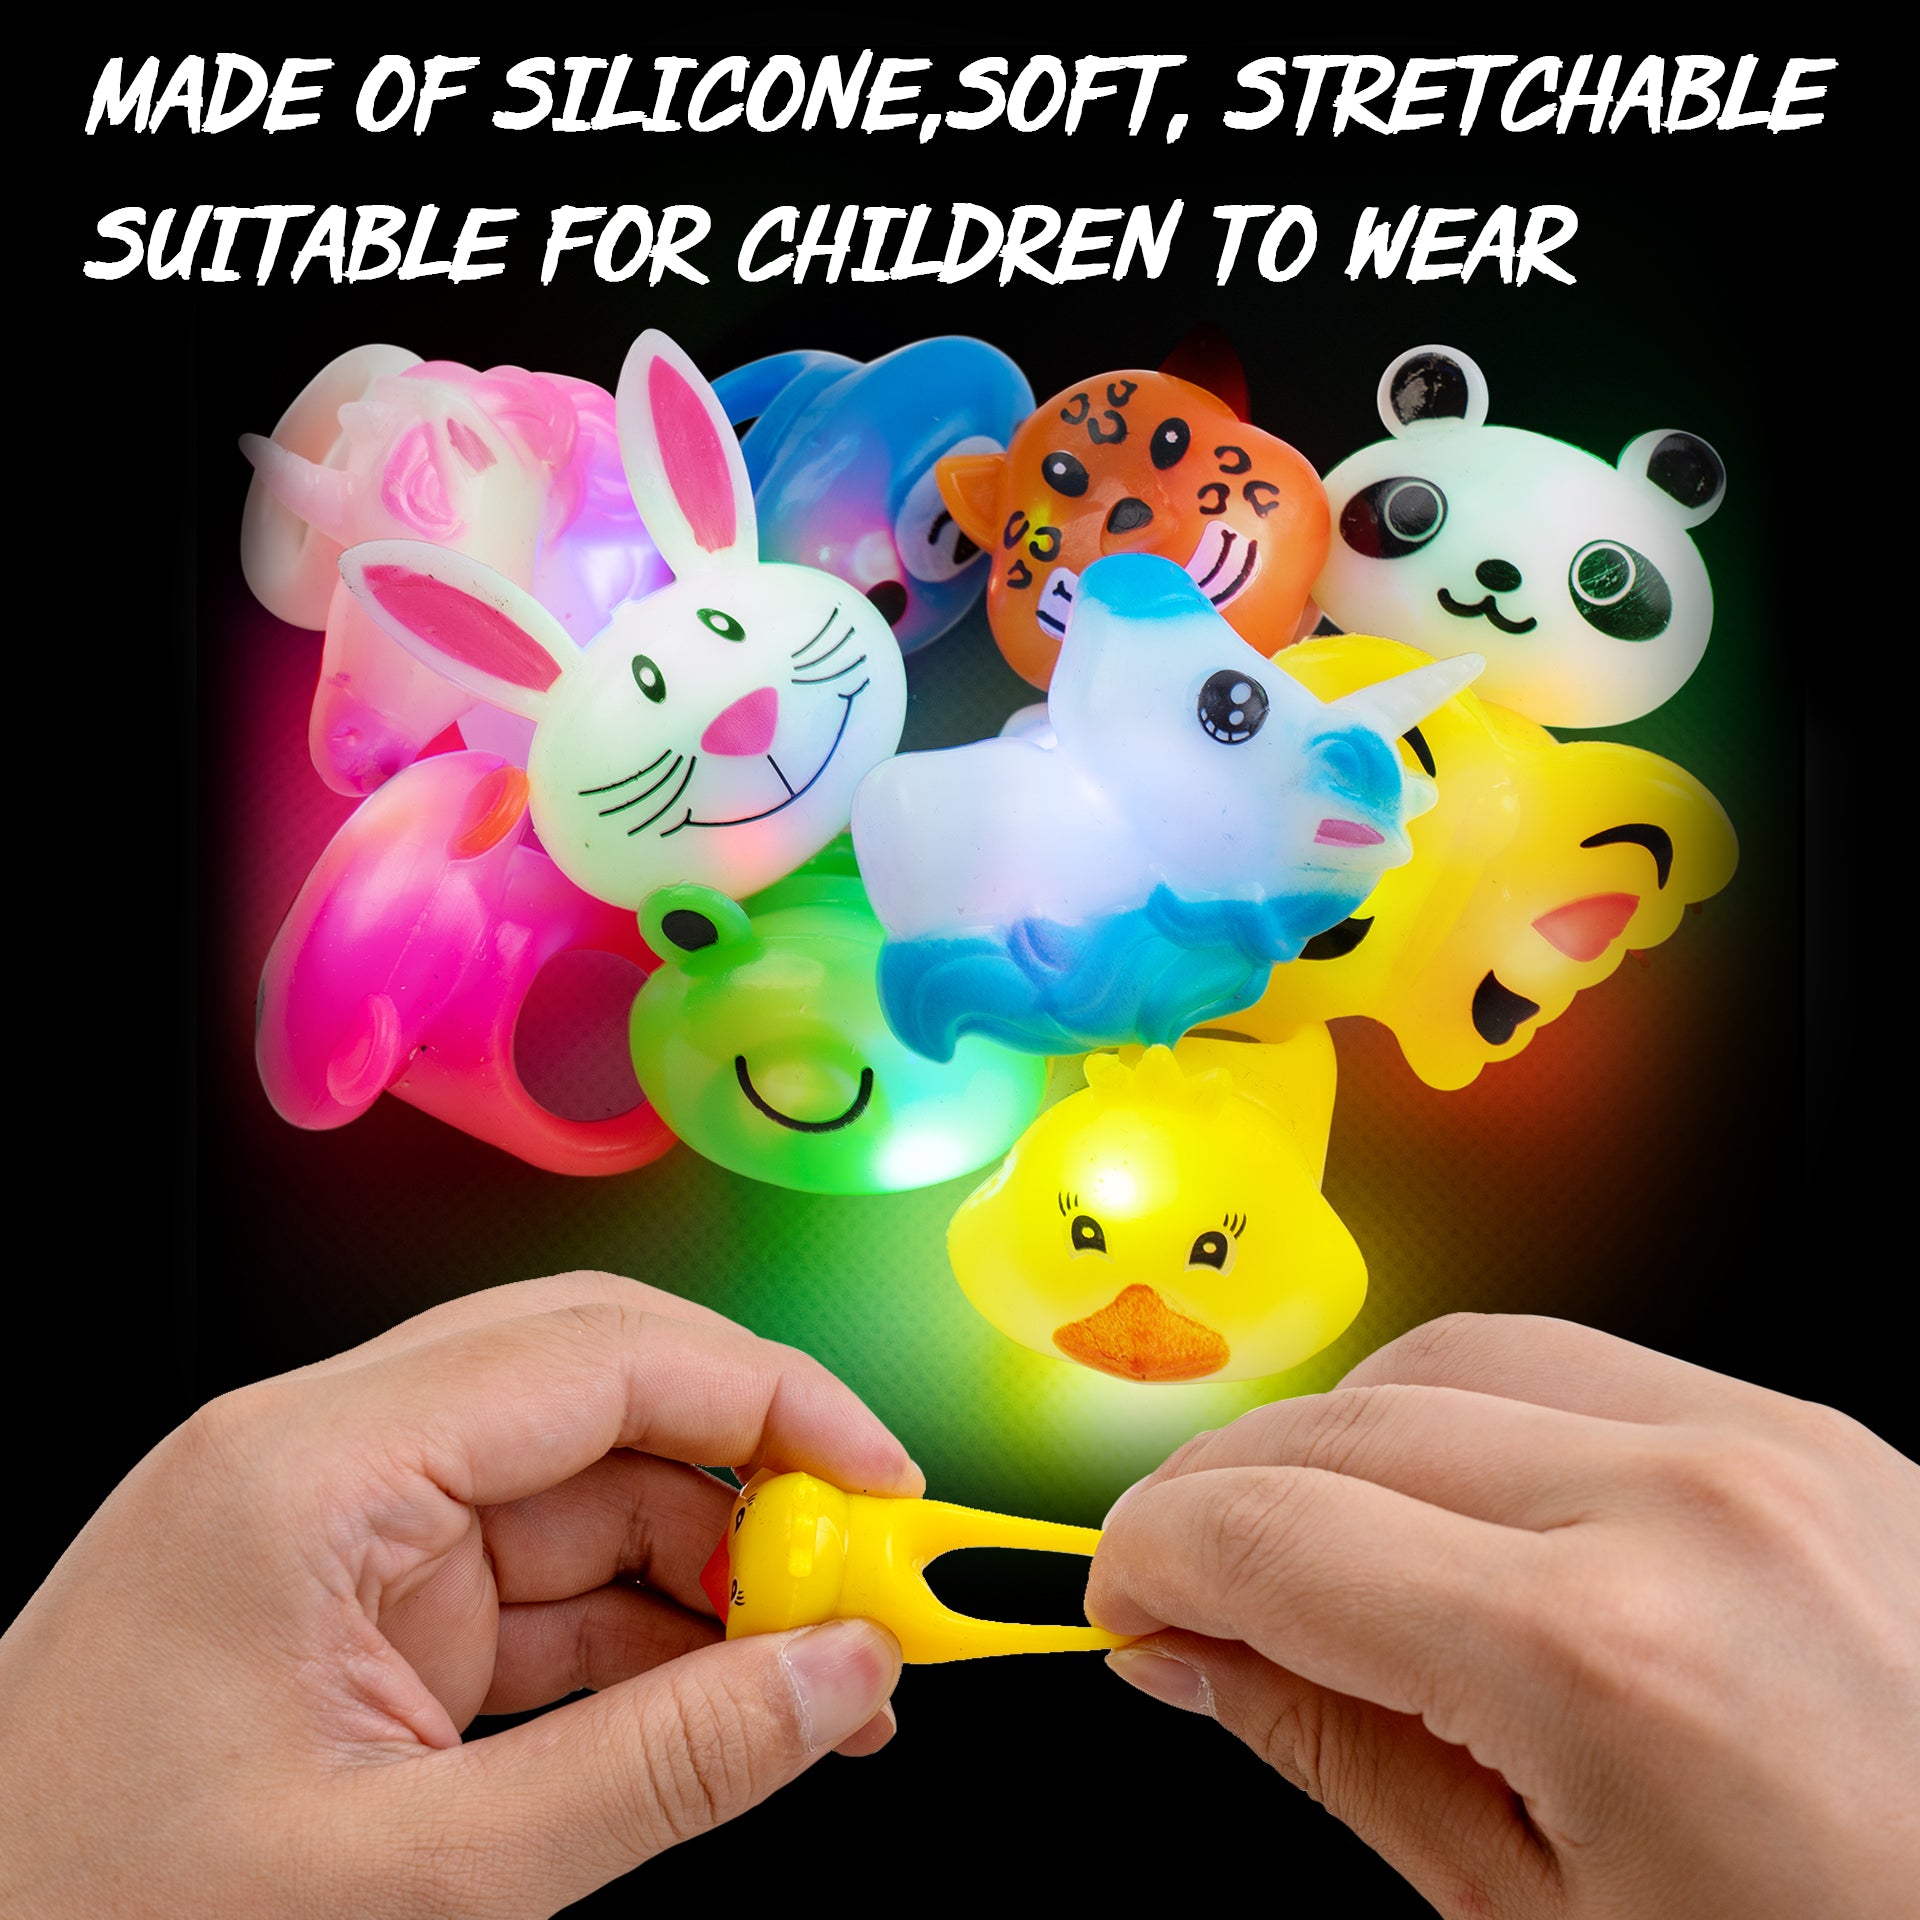 DIY Slime Kit Toy for Kids, Girls & Boys Ages 3-12, Glow in The